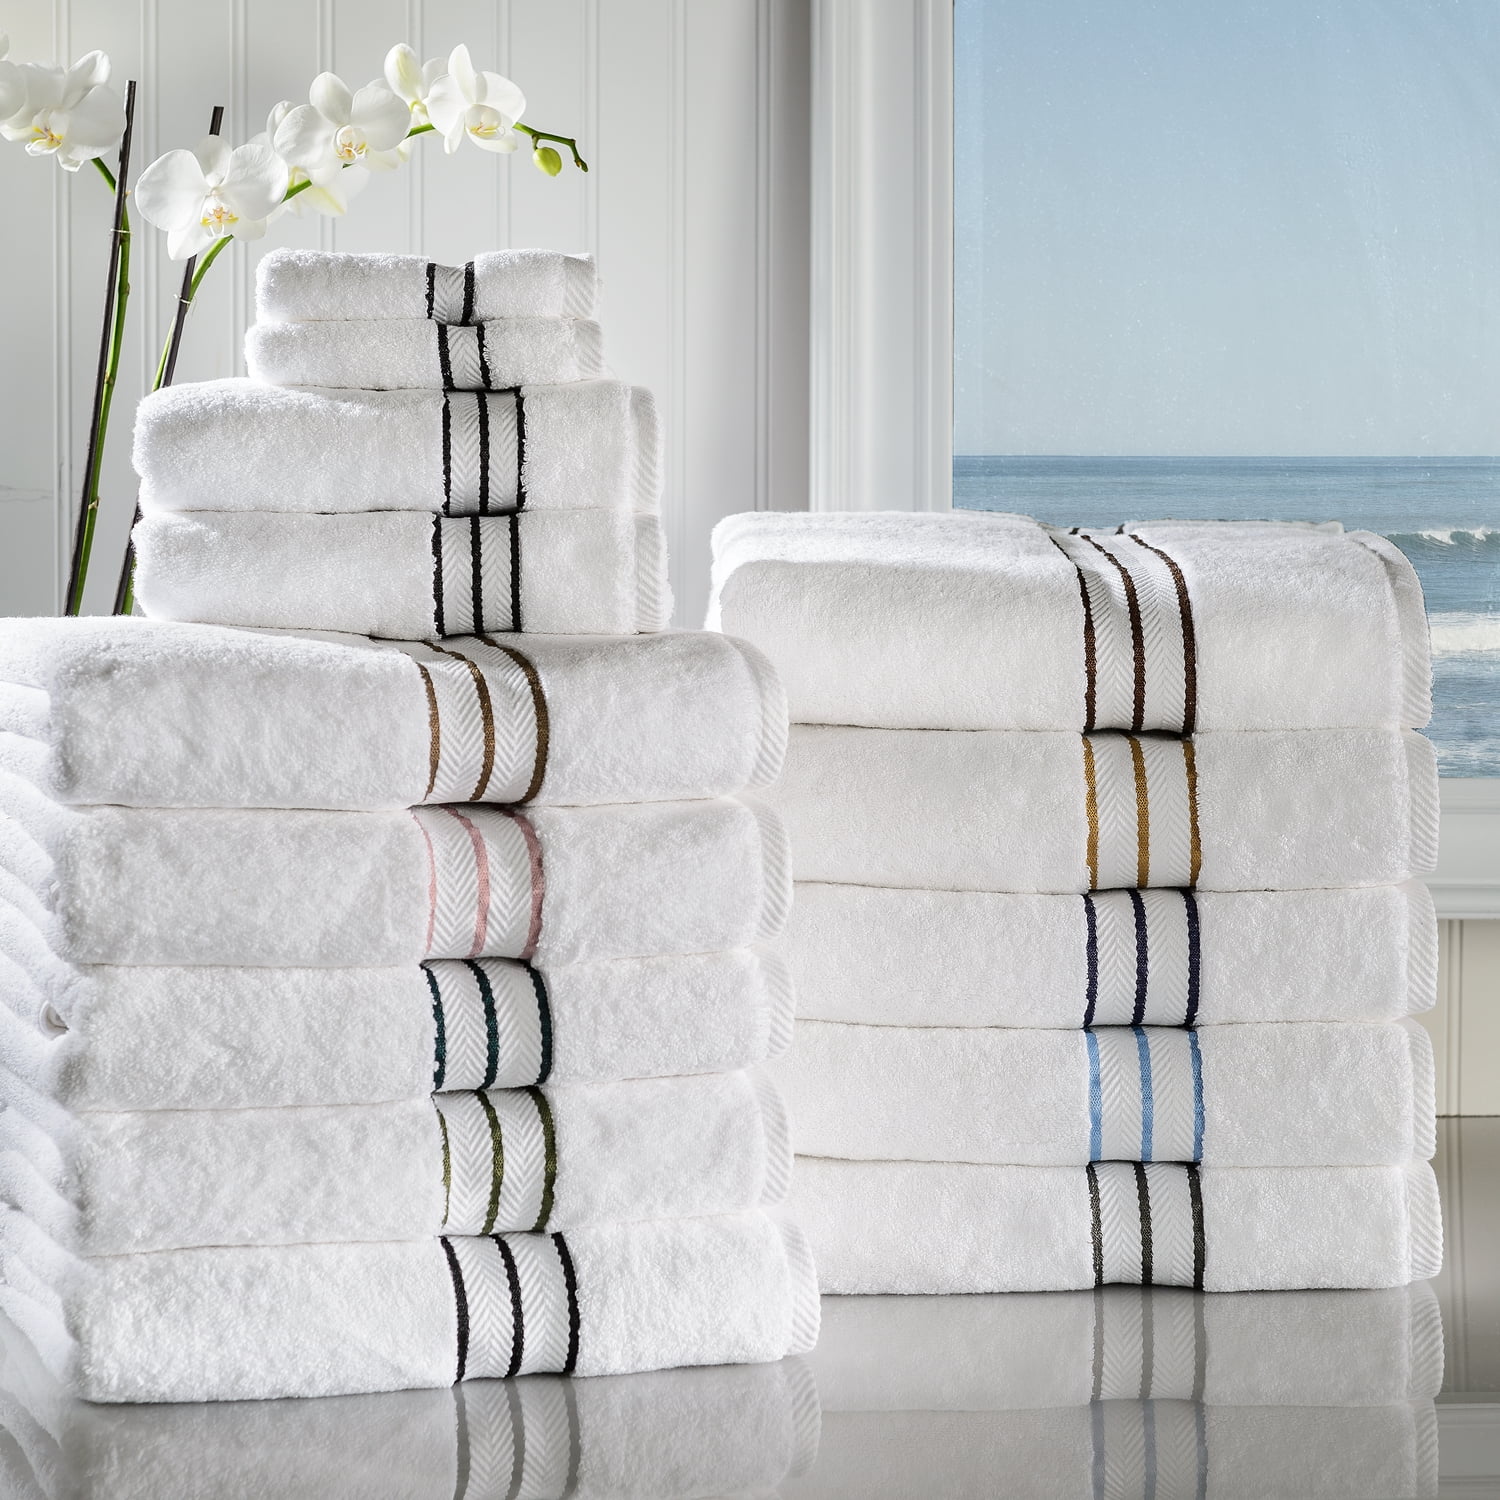 Onsen Plush Bath Towels Complete Set - Luxury, Ultra-Fluffy Bath, Face & Hand Towels, 100% Turkish-Grown Aegean Cotton, Wovey Collection, Fog